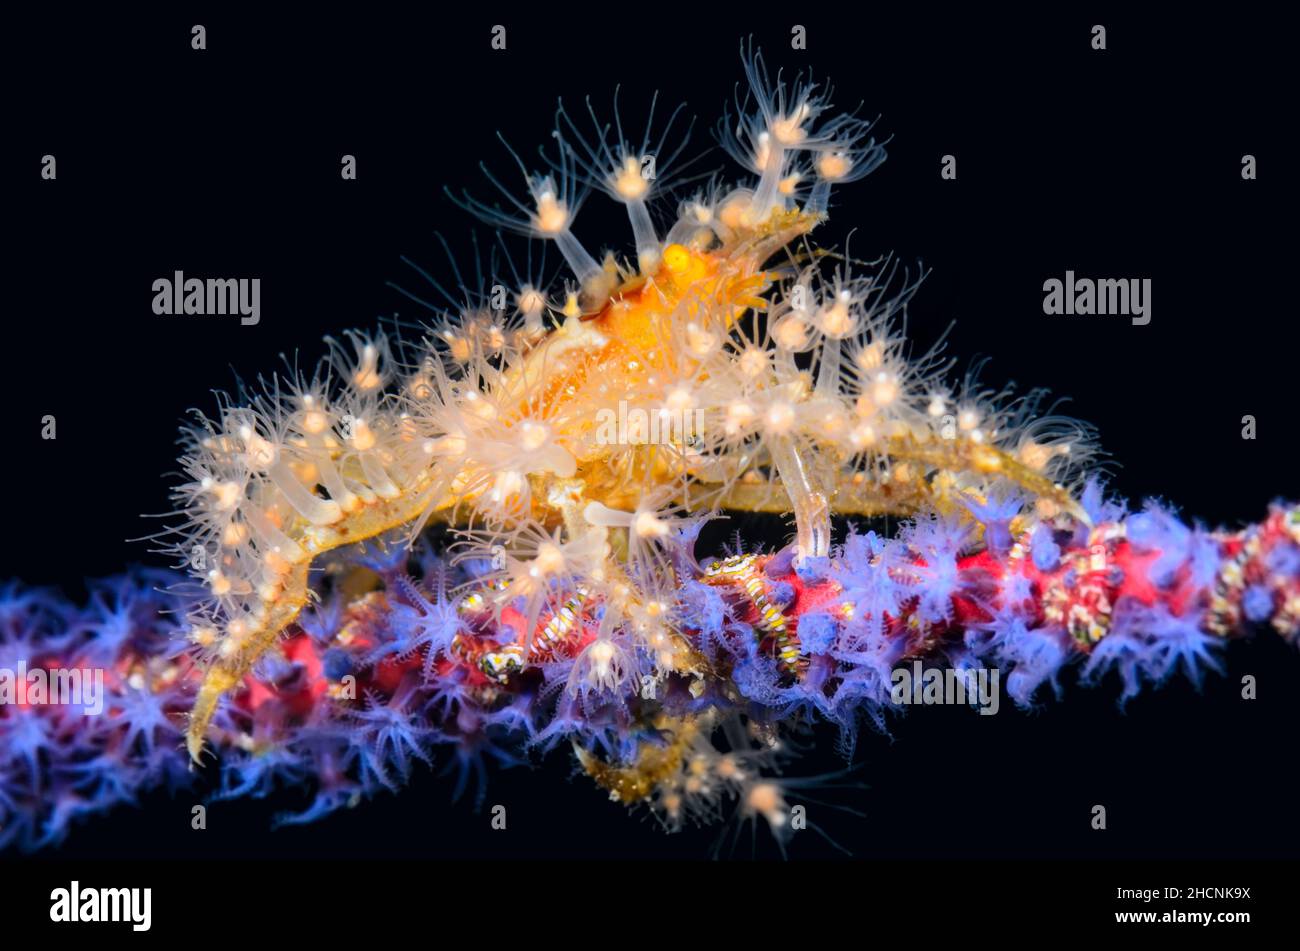 Hydroid decorator crab, Hyastenus sp. uses hydroids for camouflage and defense, Alor, Nusa Tenggara, Indonesia, Pacific Stock Photo